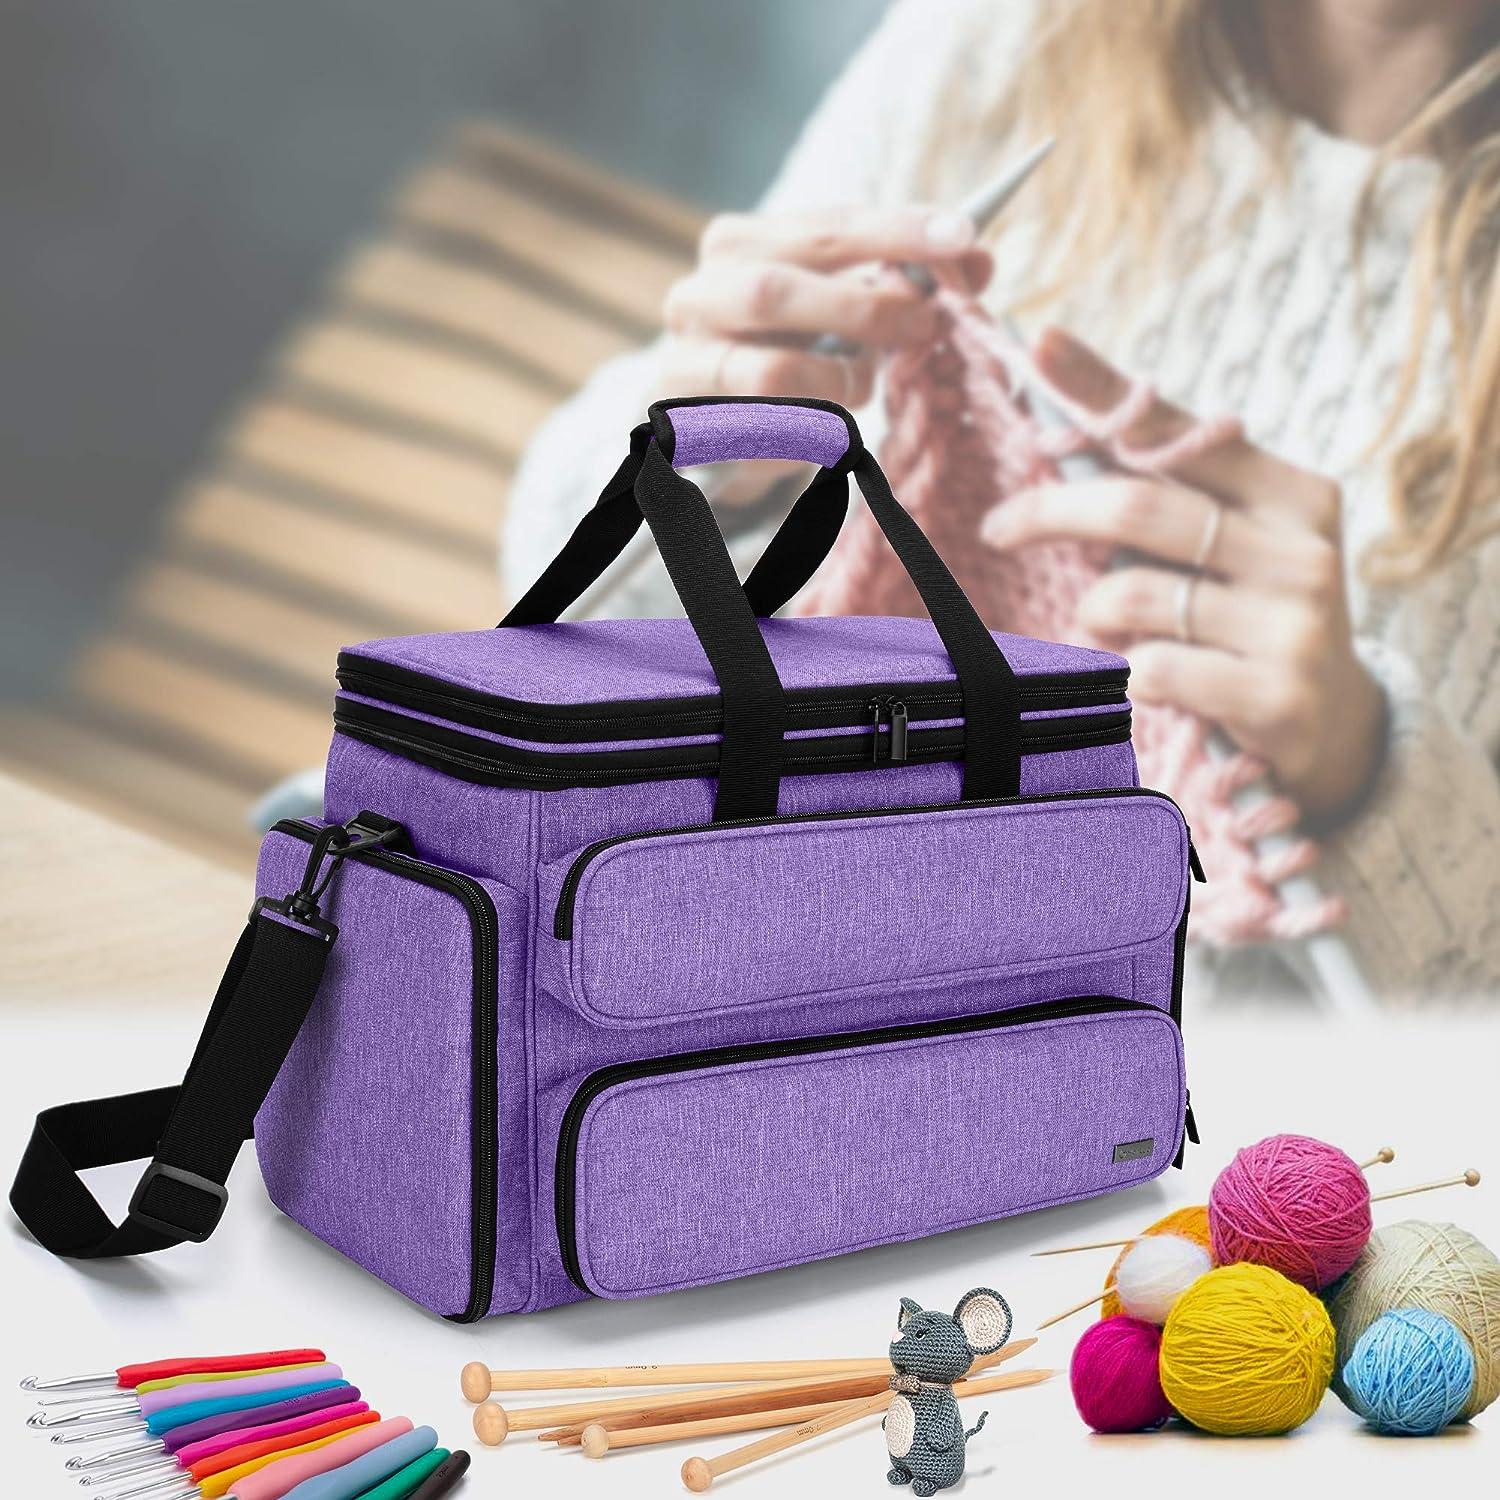 YARWO Knitting Yarn Bag, Portable Crochet Storage Tote with Double Top  Cover and Yarn Holes for Knitting Needles(Up to 14), Unfinished Projects  and Skeins of Yarn, Purple